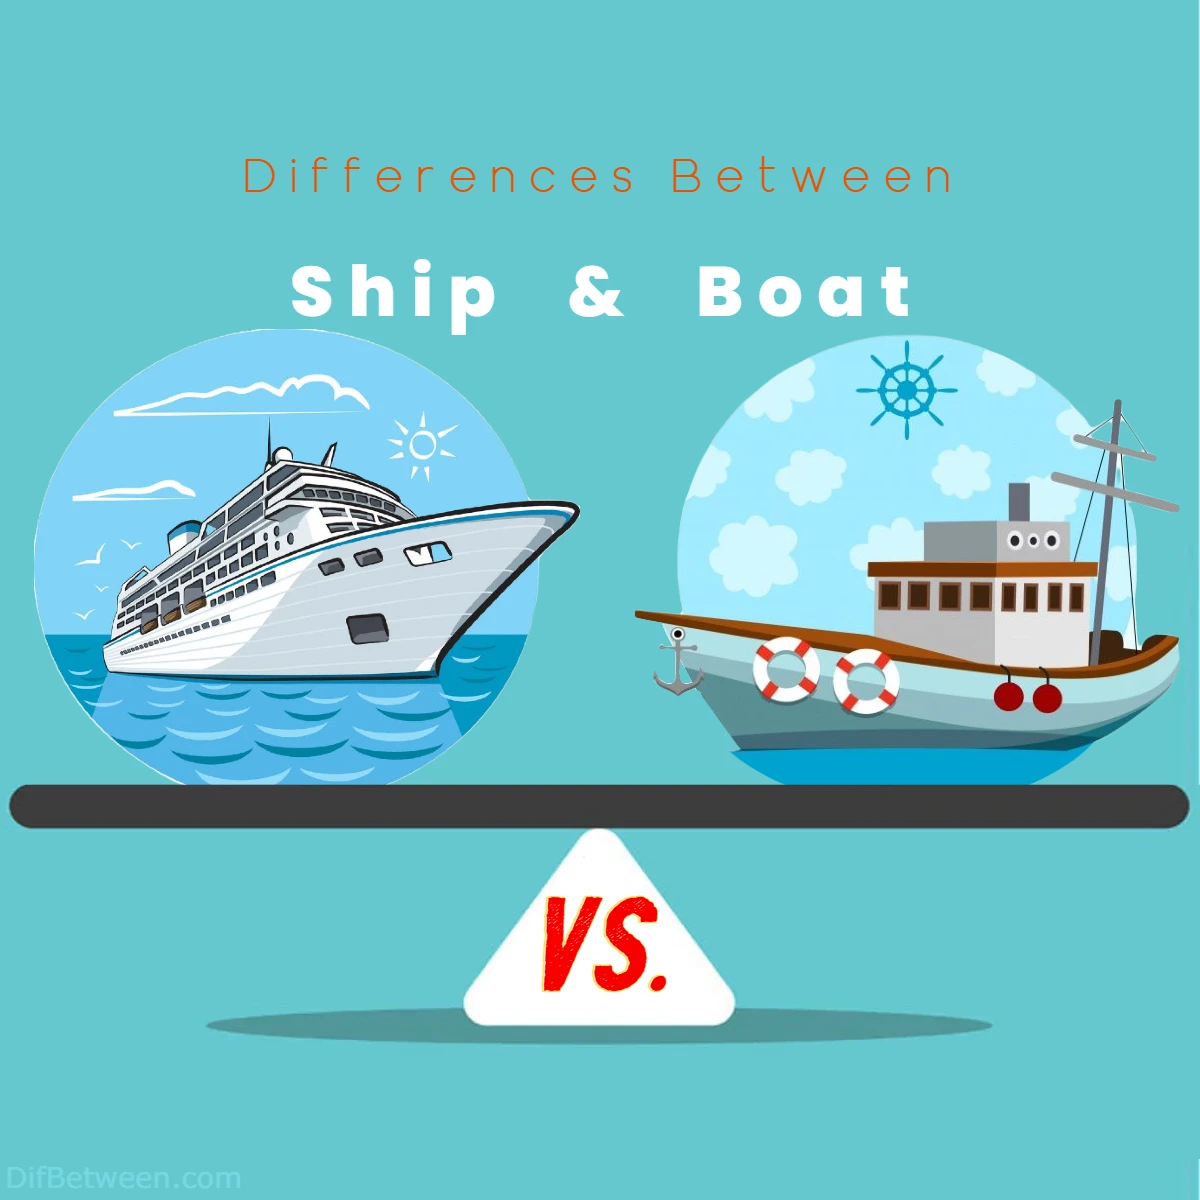 Differences Between Ship vs Boat